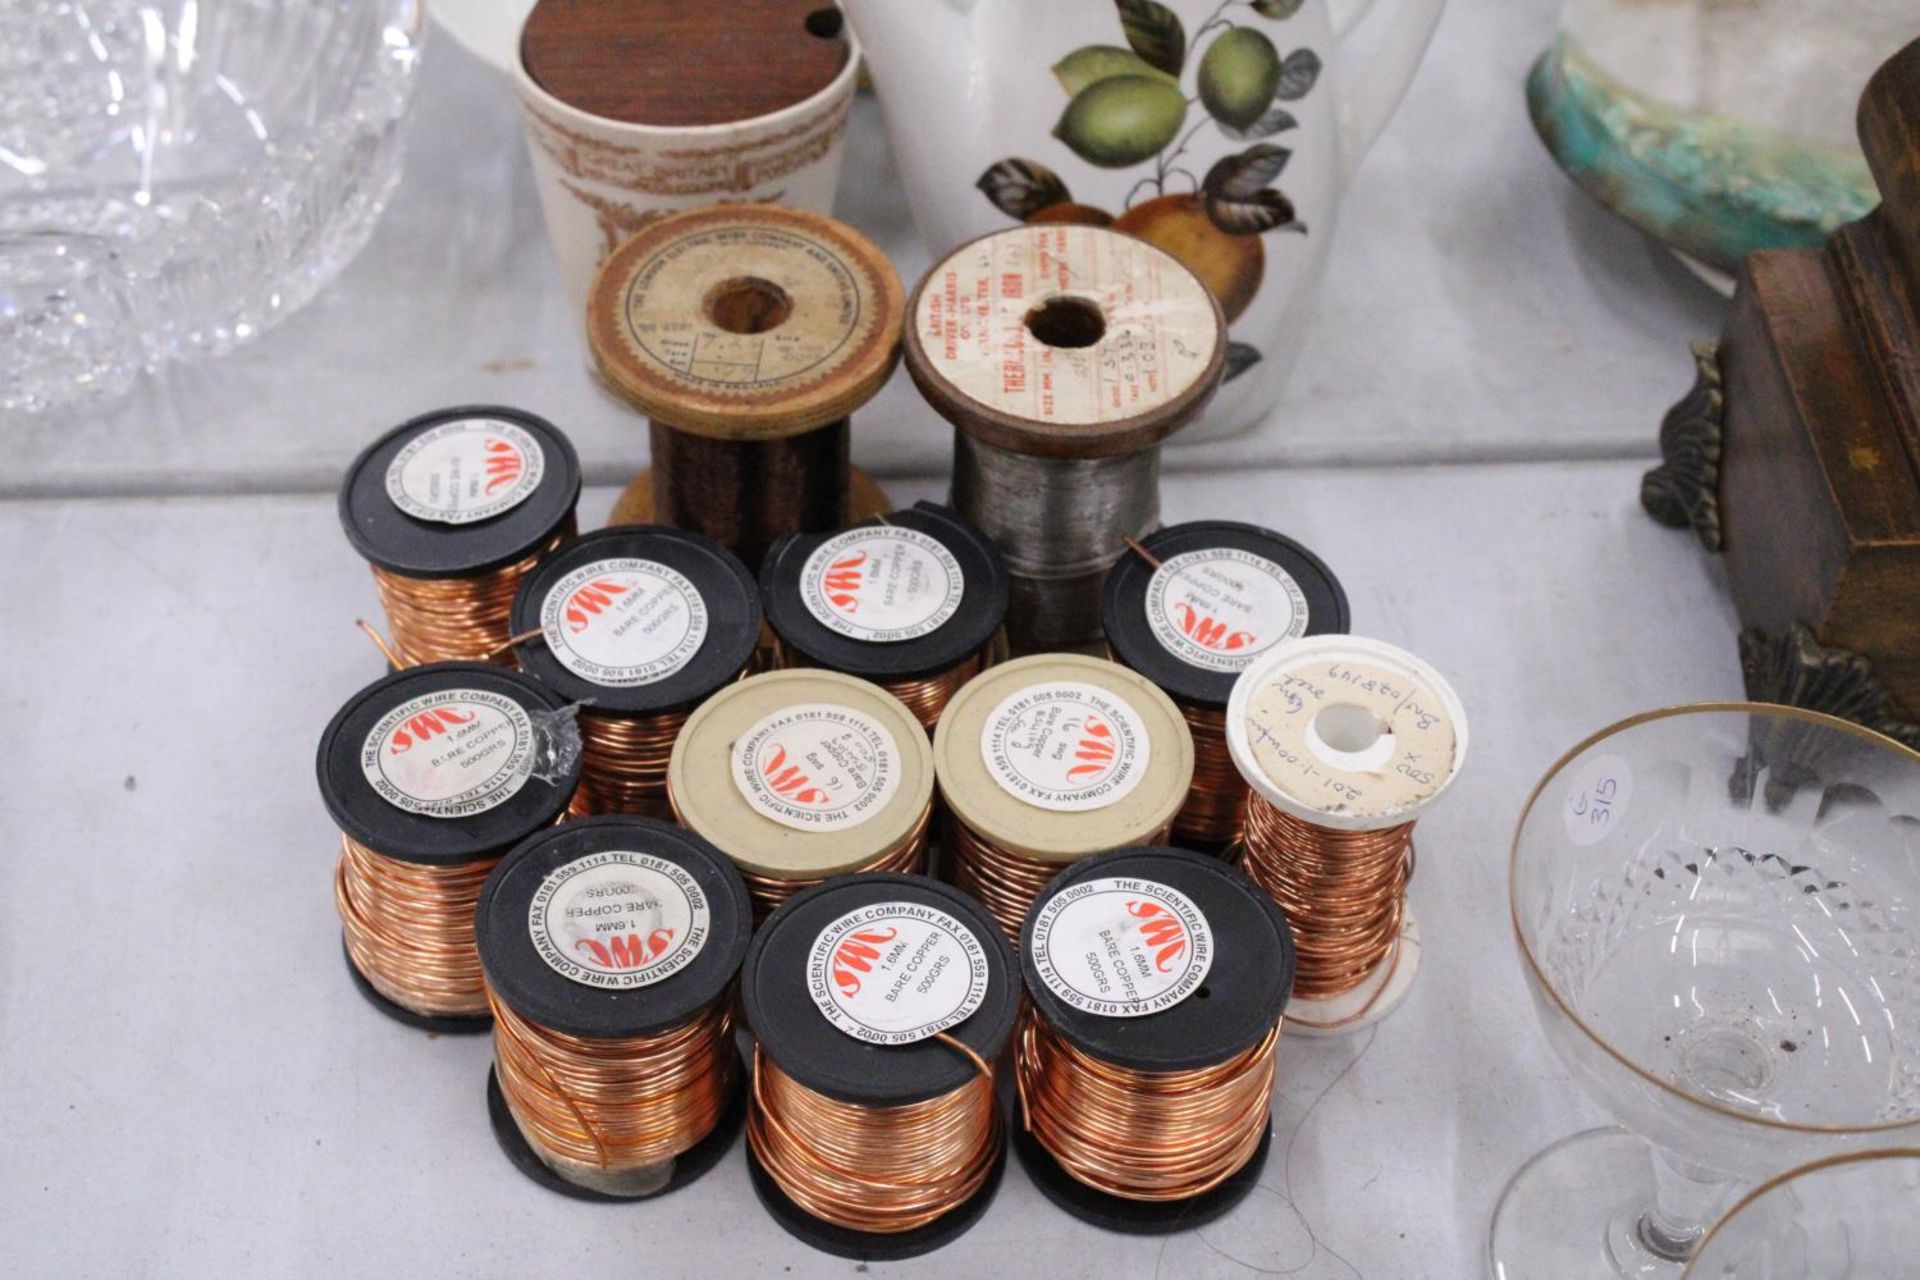 TWELVE SPOOLS OF COPPER WIRE AND ONE SPOOL OF IRON WIRE